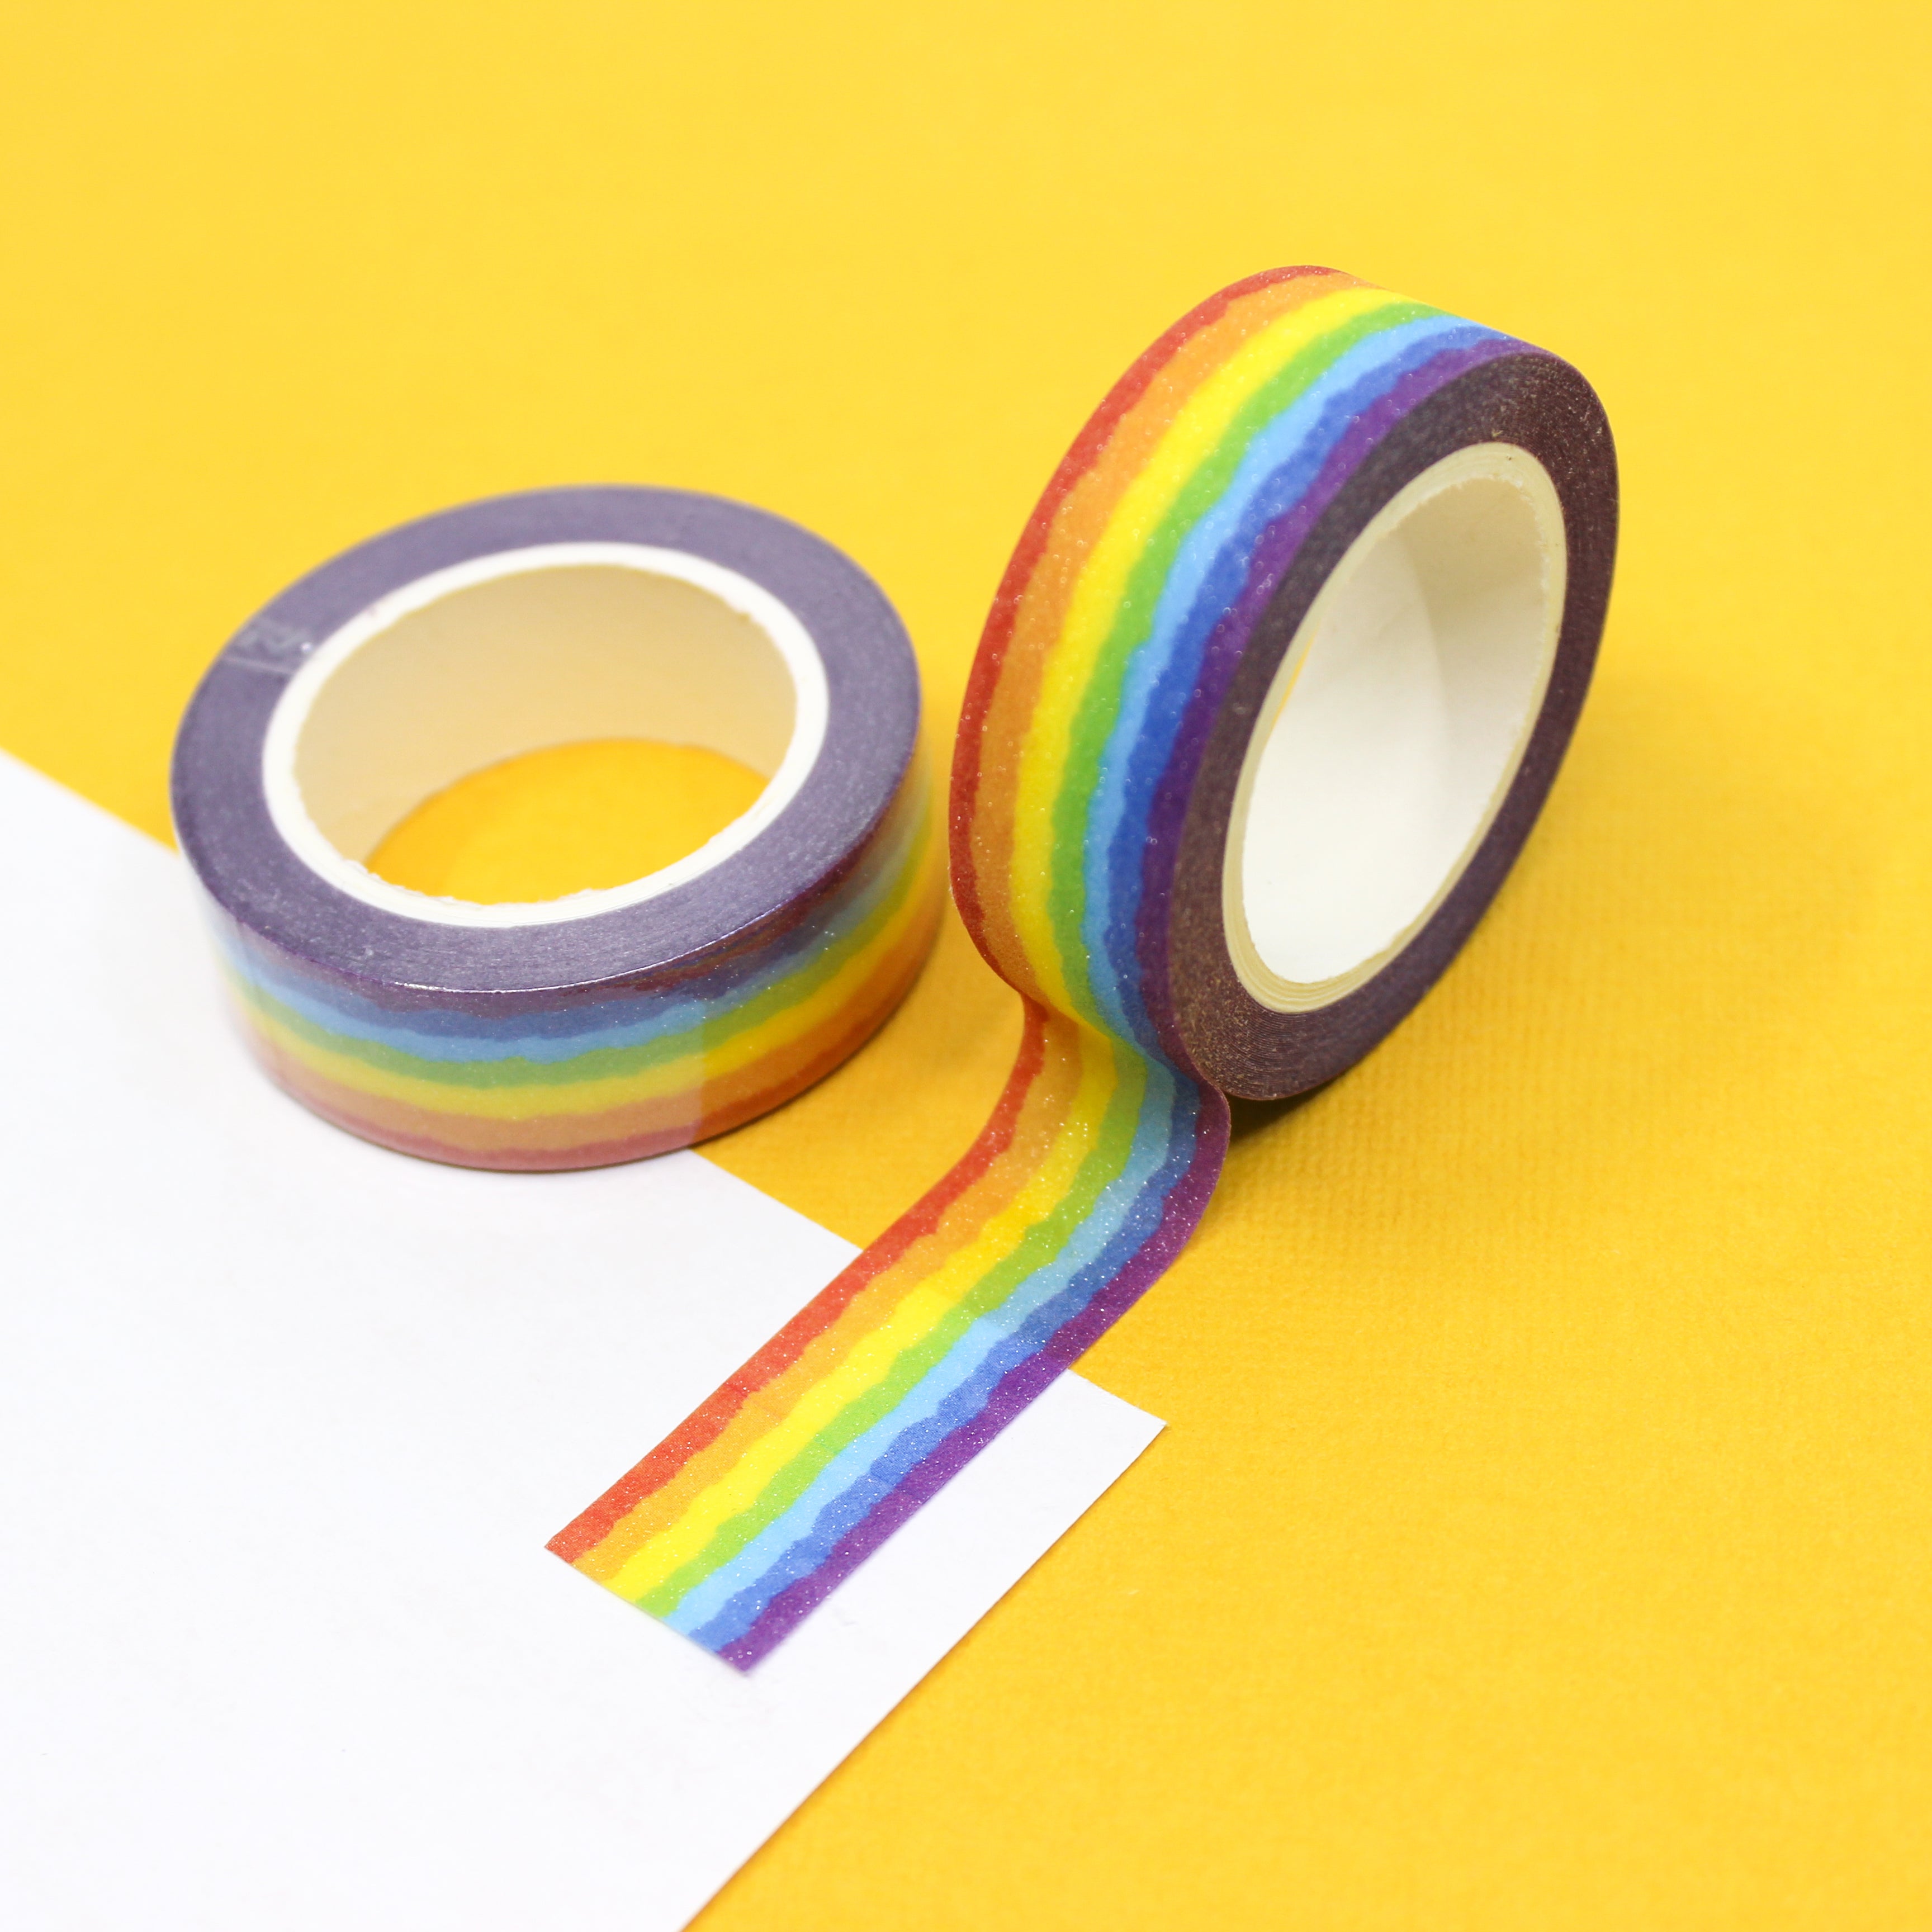 This is a rainbow stripe themed washi tape from BBB Supplies Craft Shop